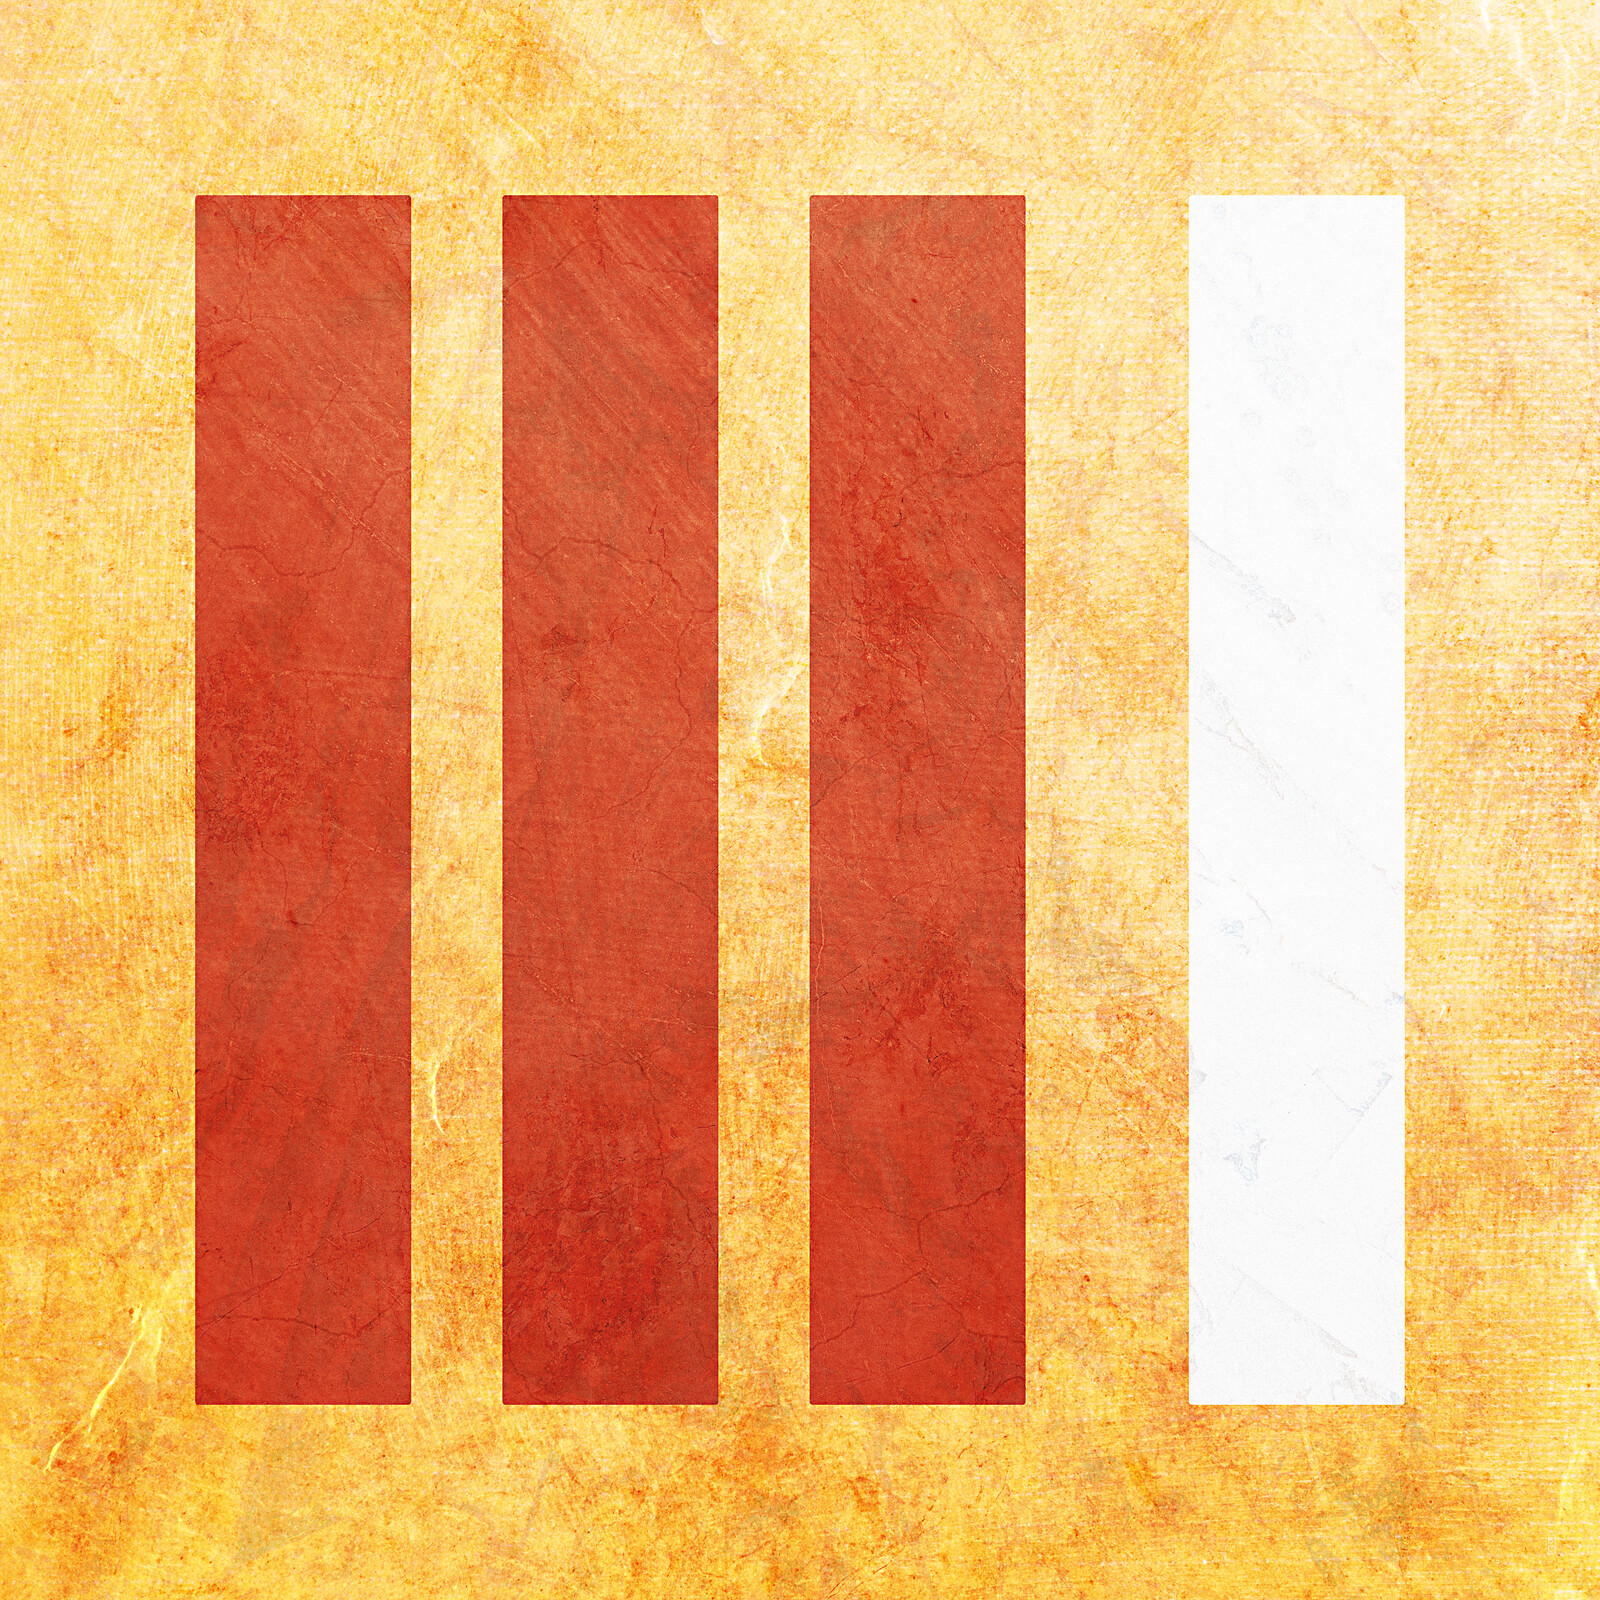 Four tall, thin rectangles. The first three are red and the fourth is white.